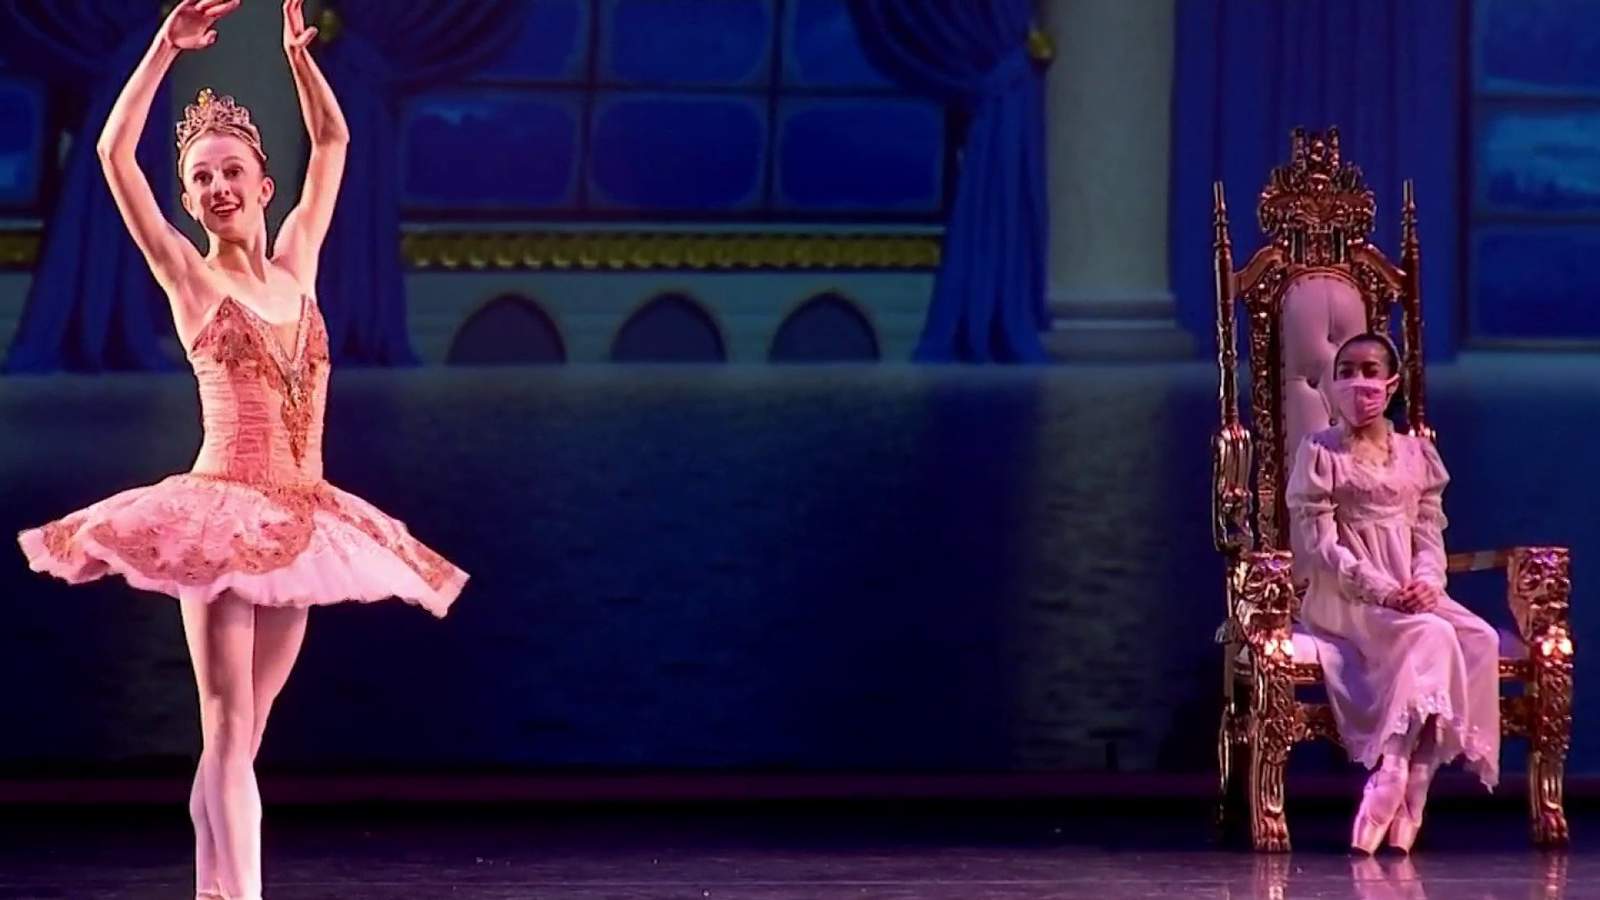 After trial-run with Sleeping Beauty, Orlando Ballet sets stage for The Nutcracker